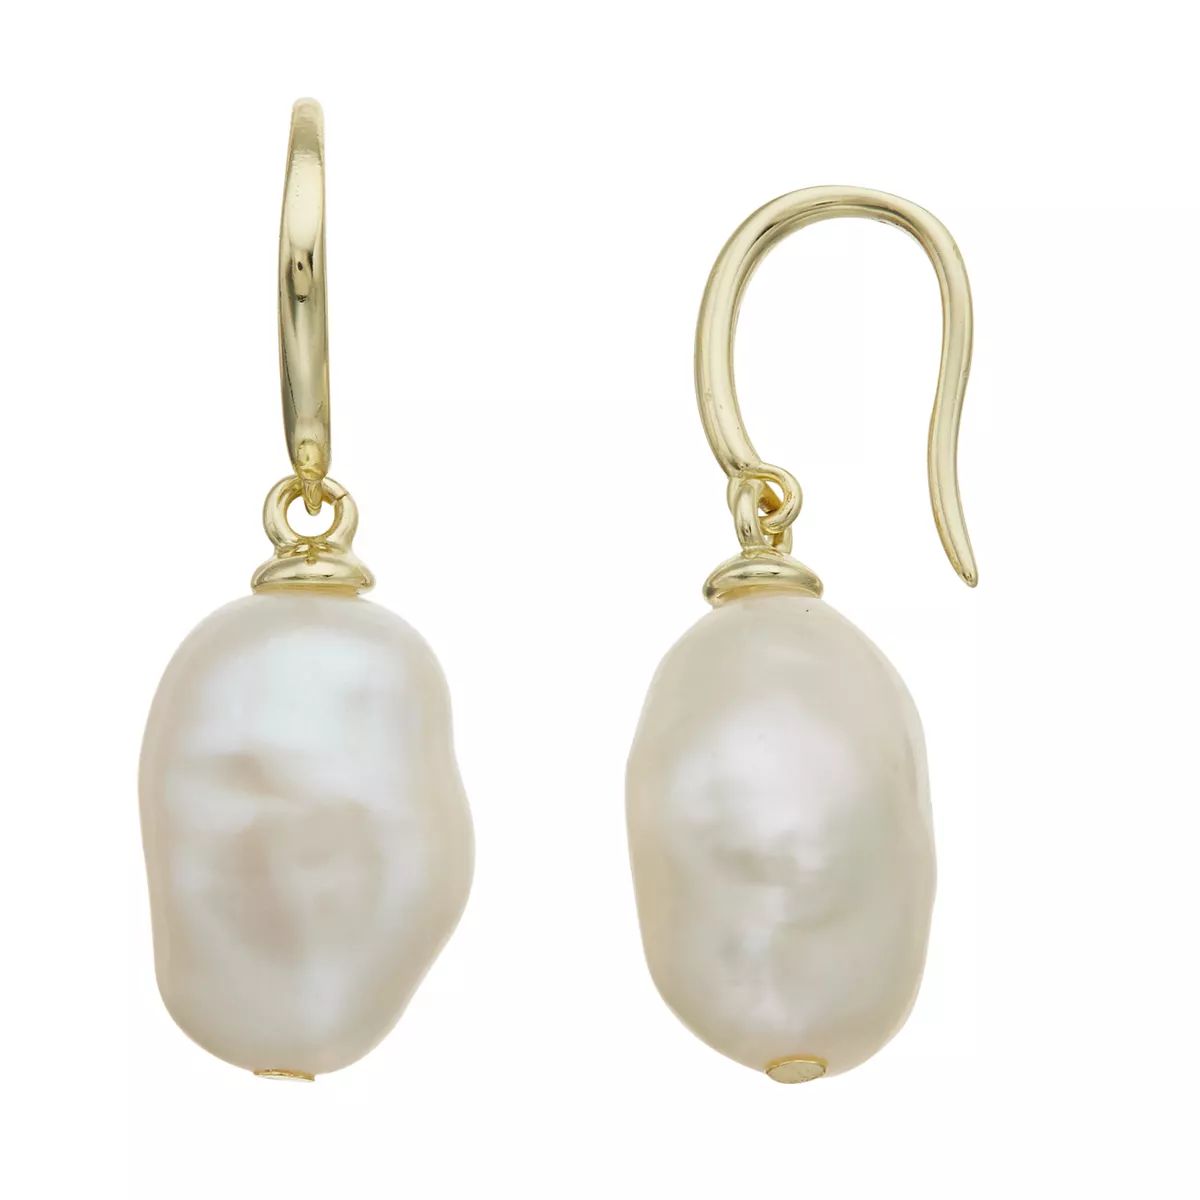 14k Gold Over Silver & Baroque Freshwater Cultured Pearl Drop Earrings | Kohl's